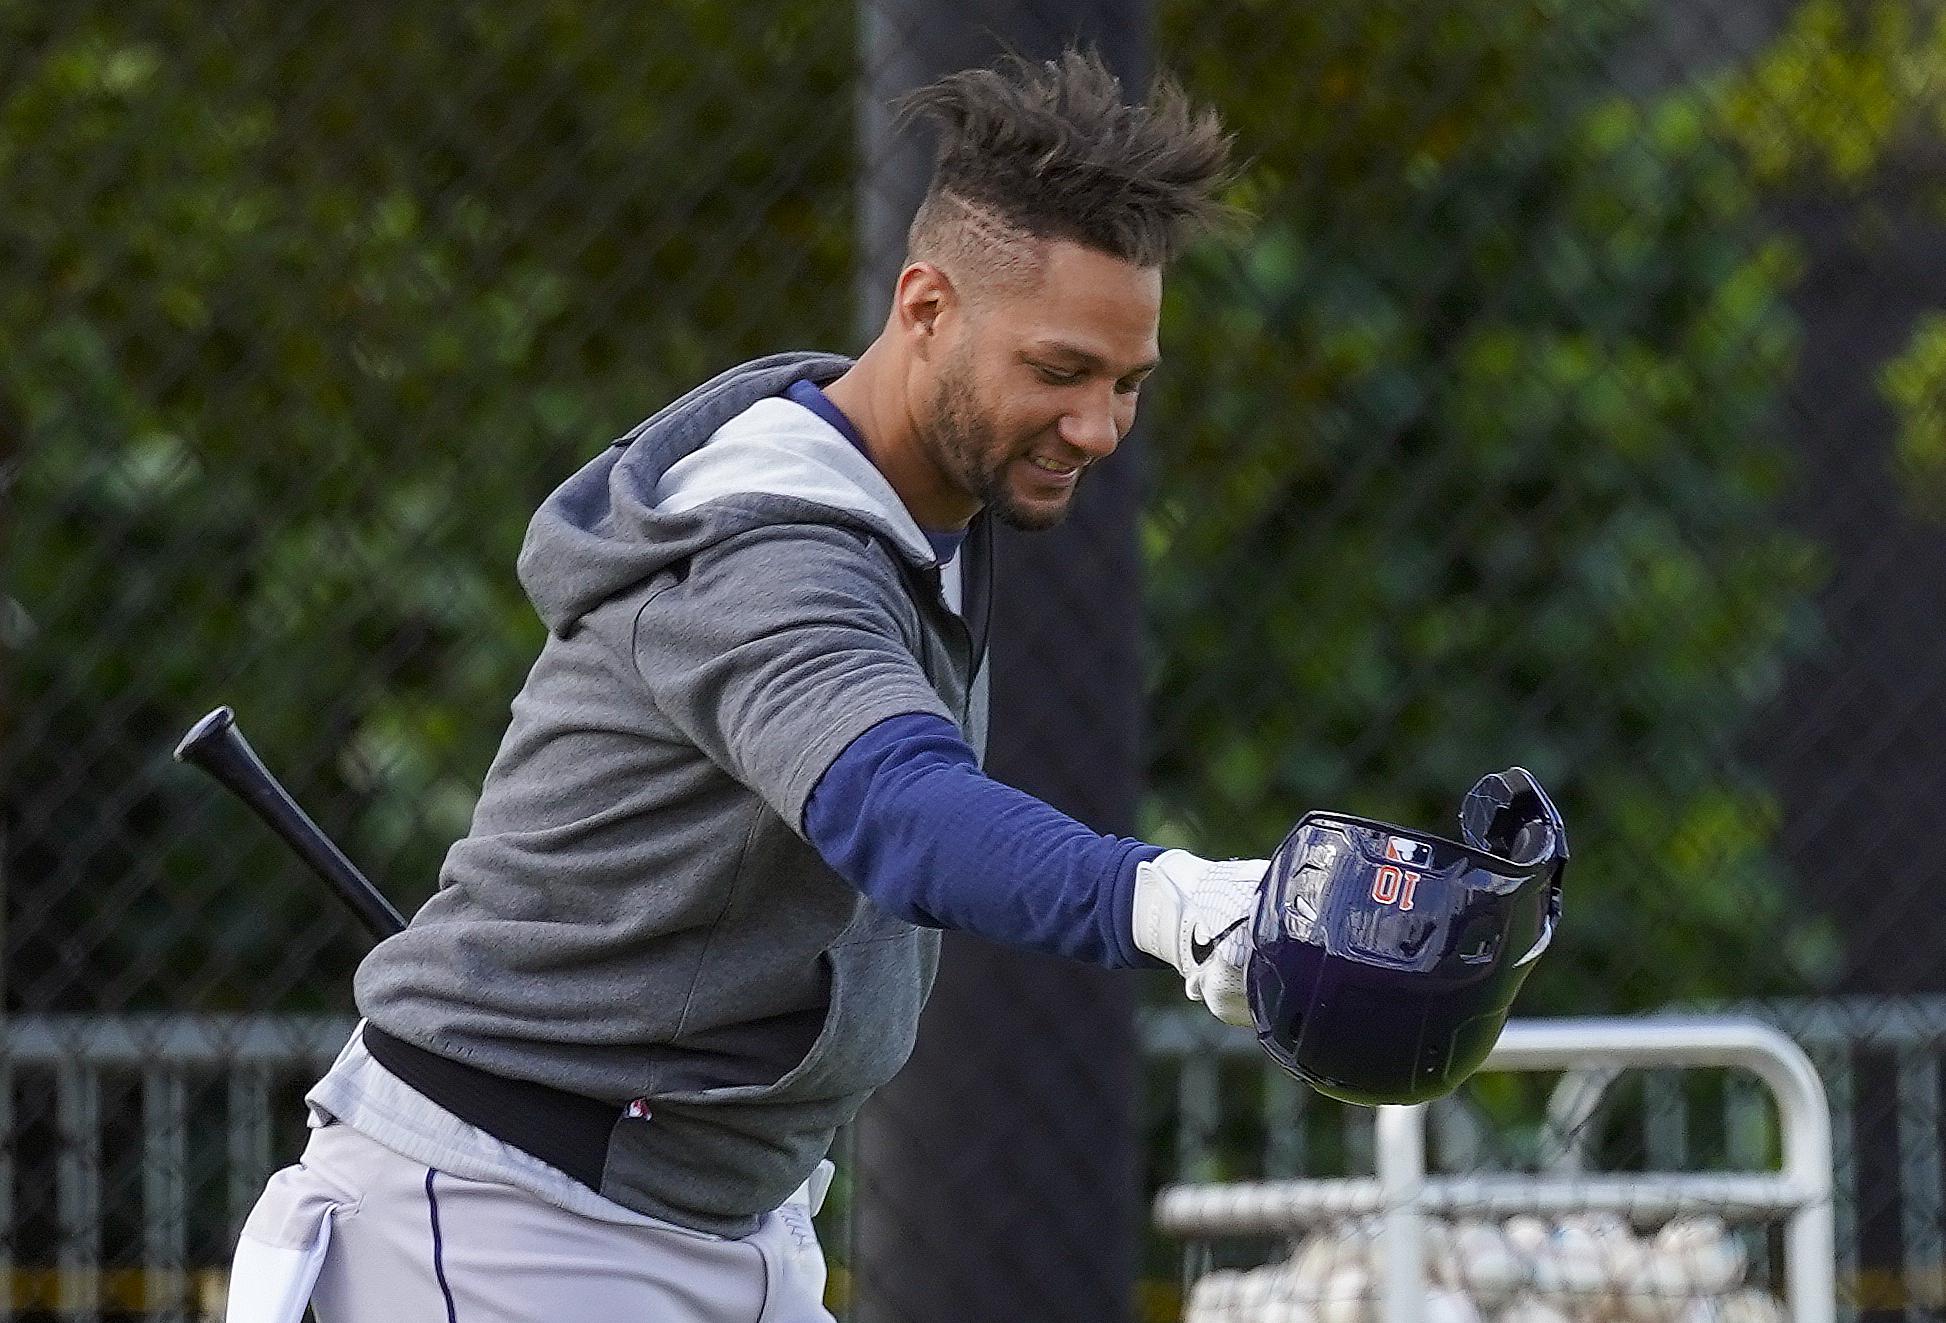 Yuli Gurriel serves as hero, inspiration for Astros' multitude of Cuban  prospects